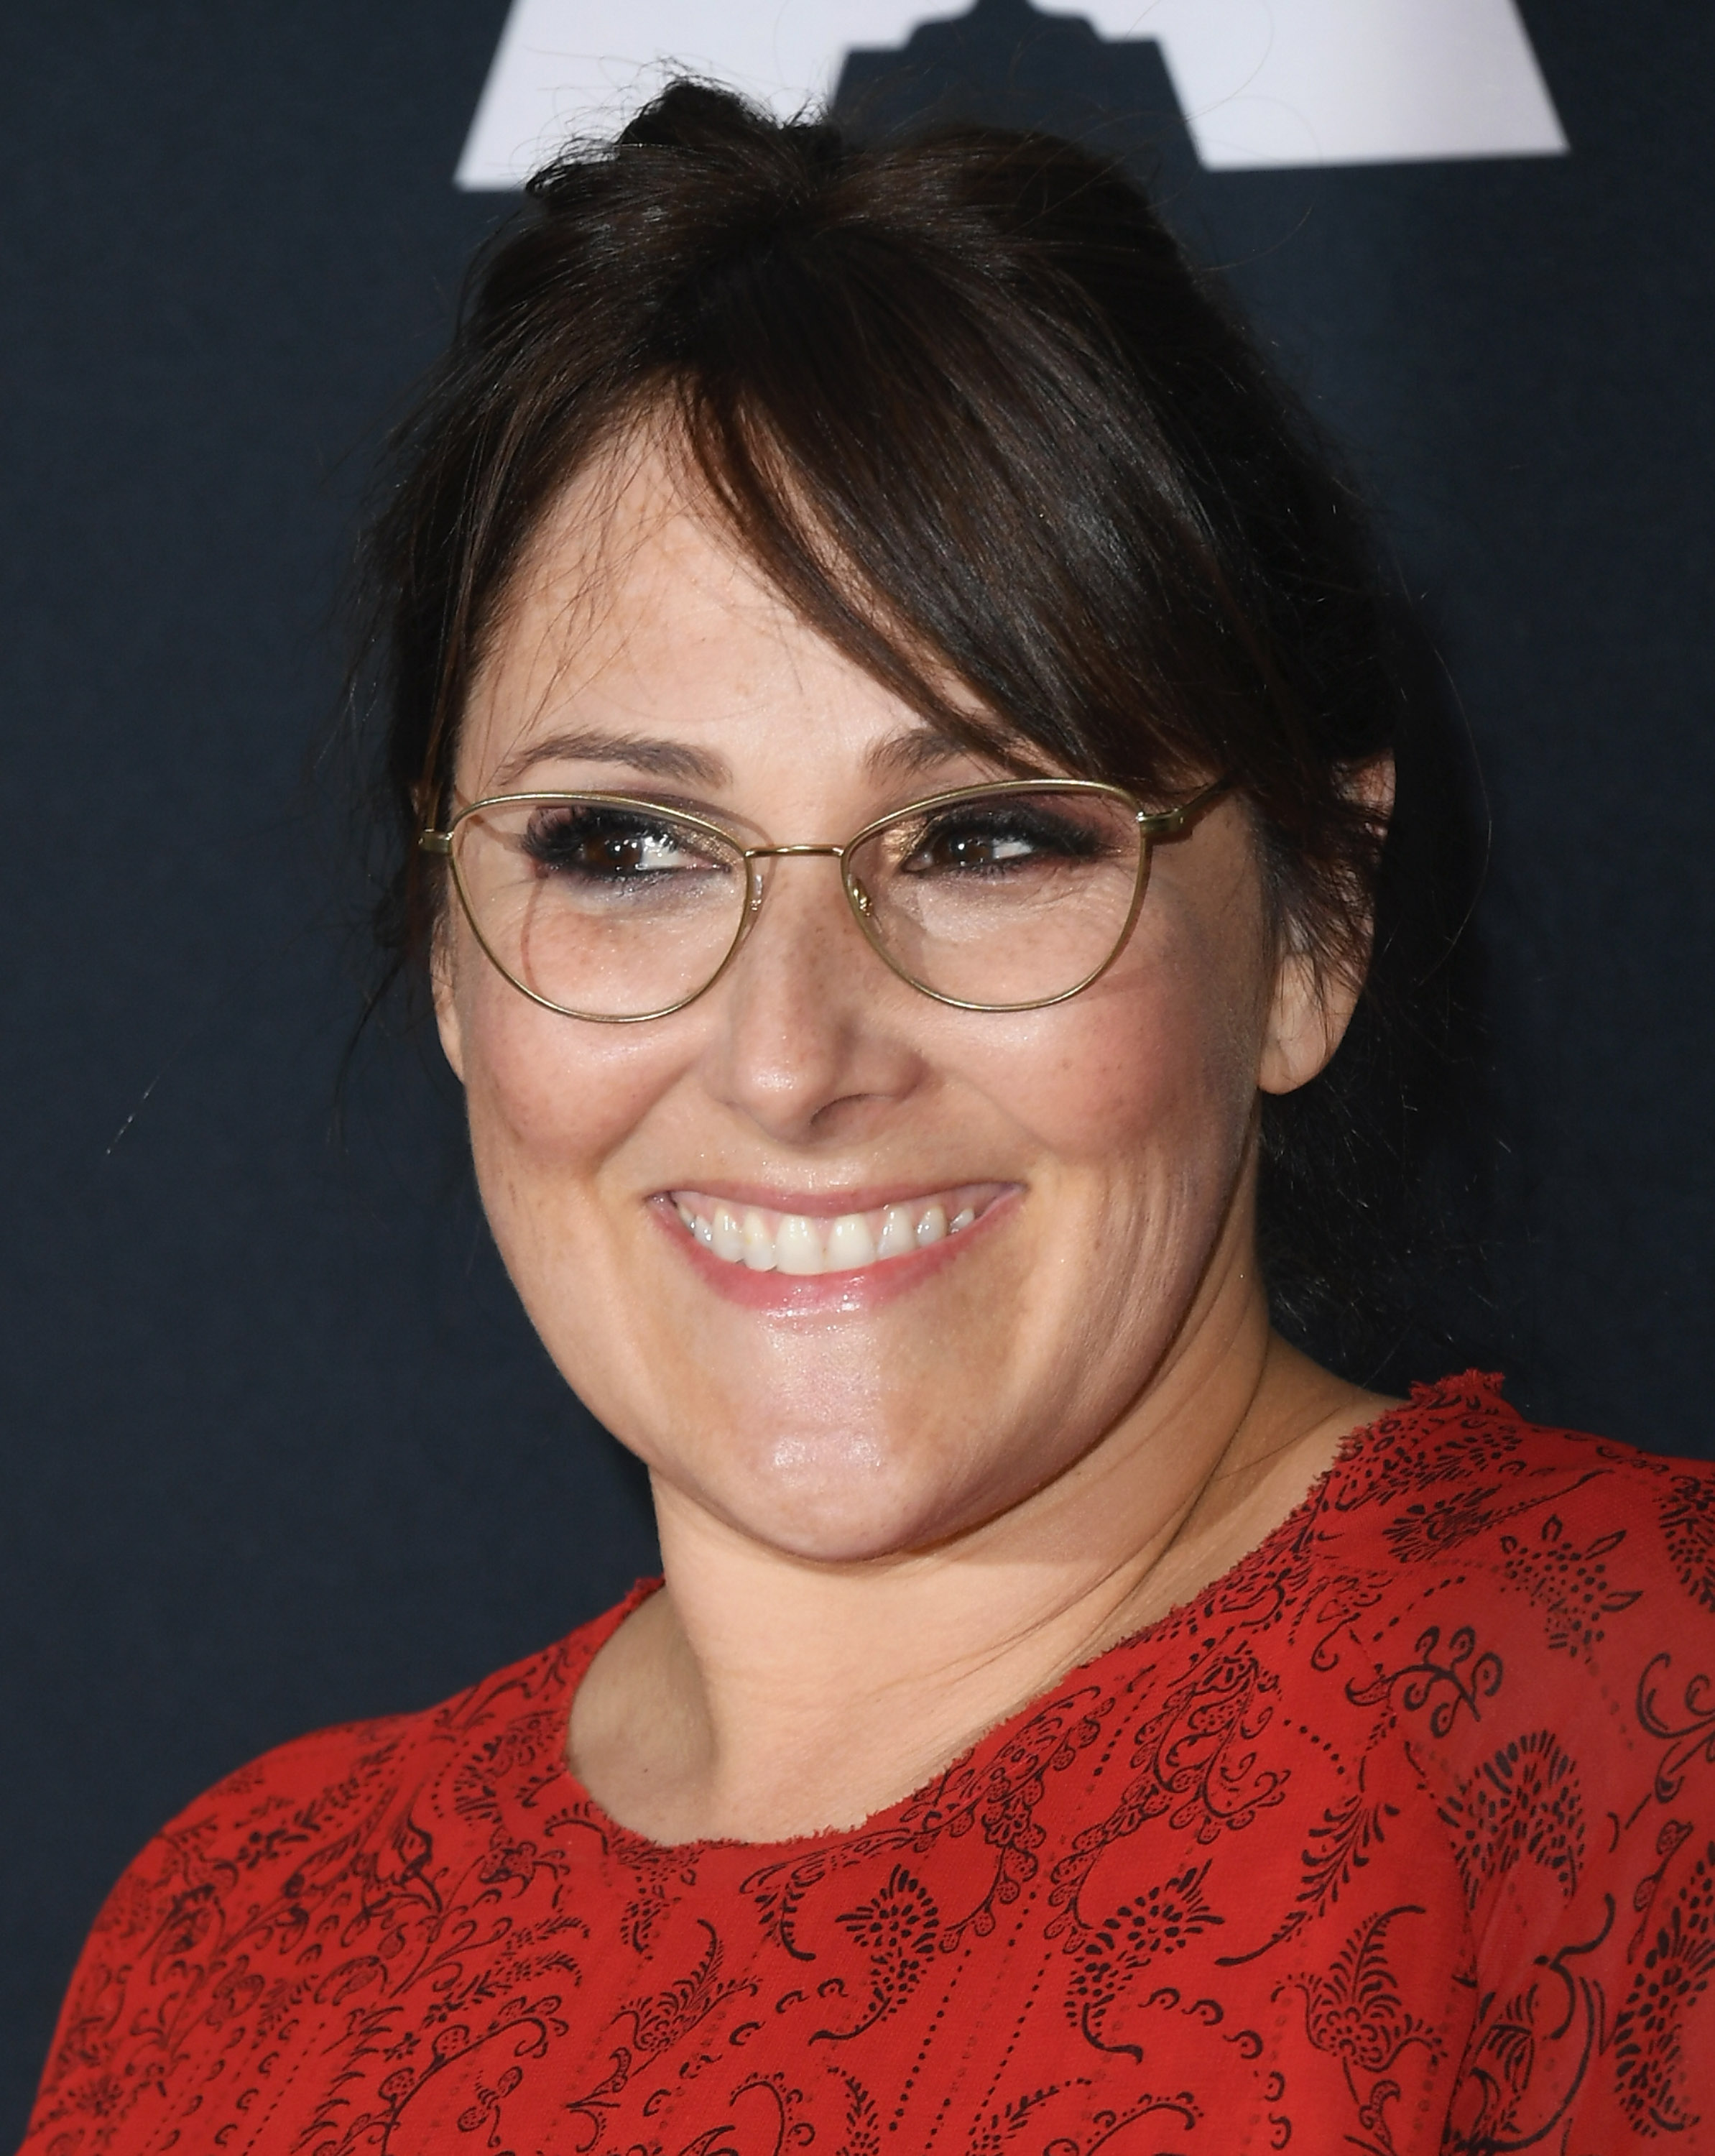 Ricki Lake attends the "Hairspray" 30th Anniversary on July 23, 2018 | Source: Getty Images